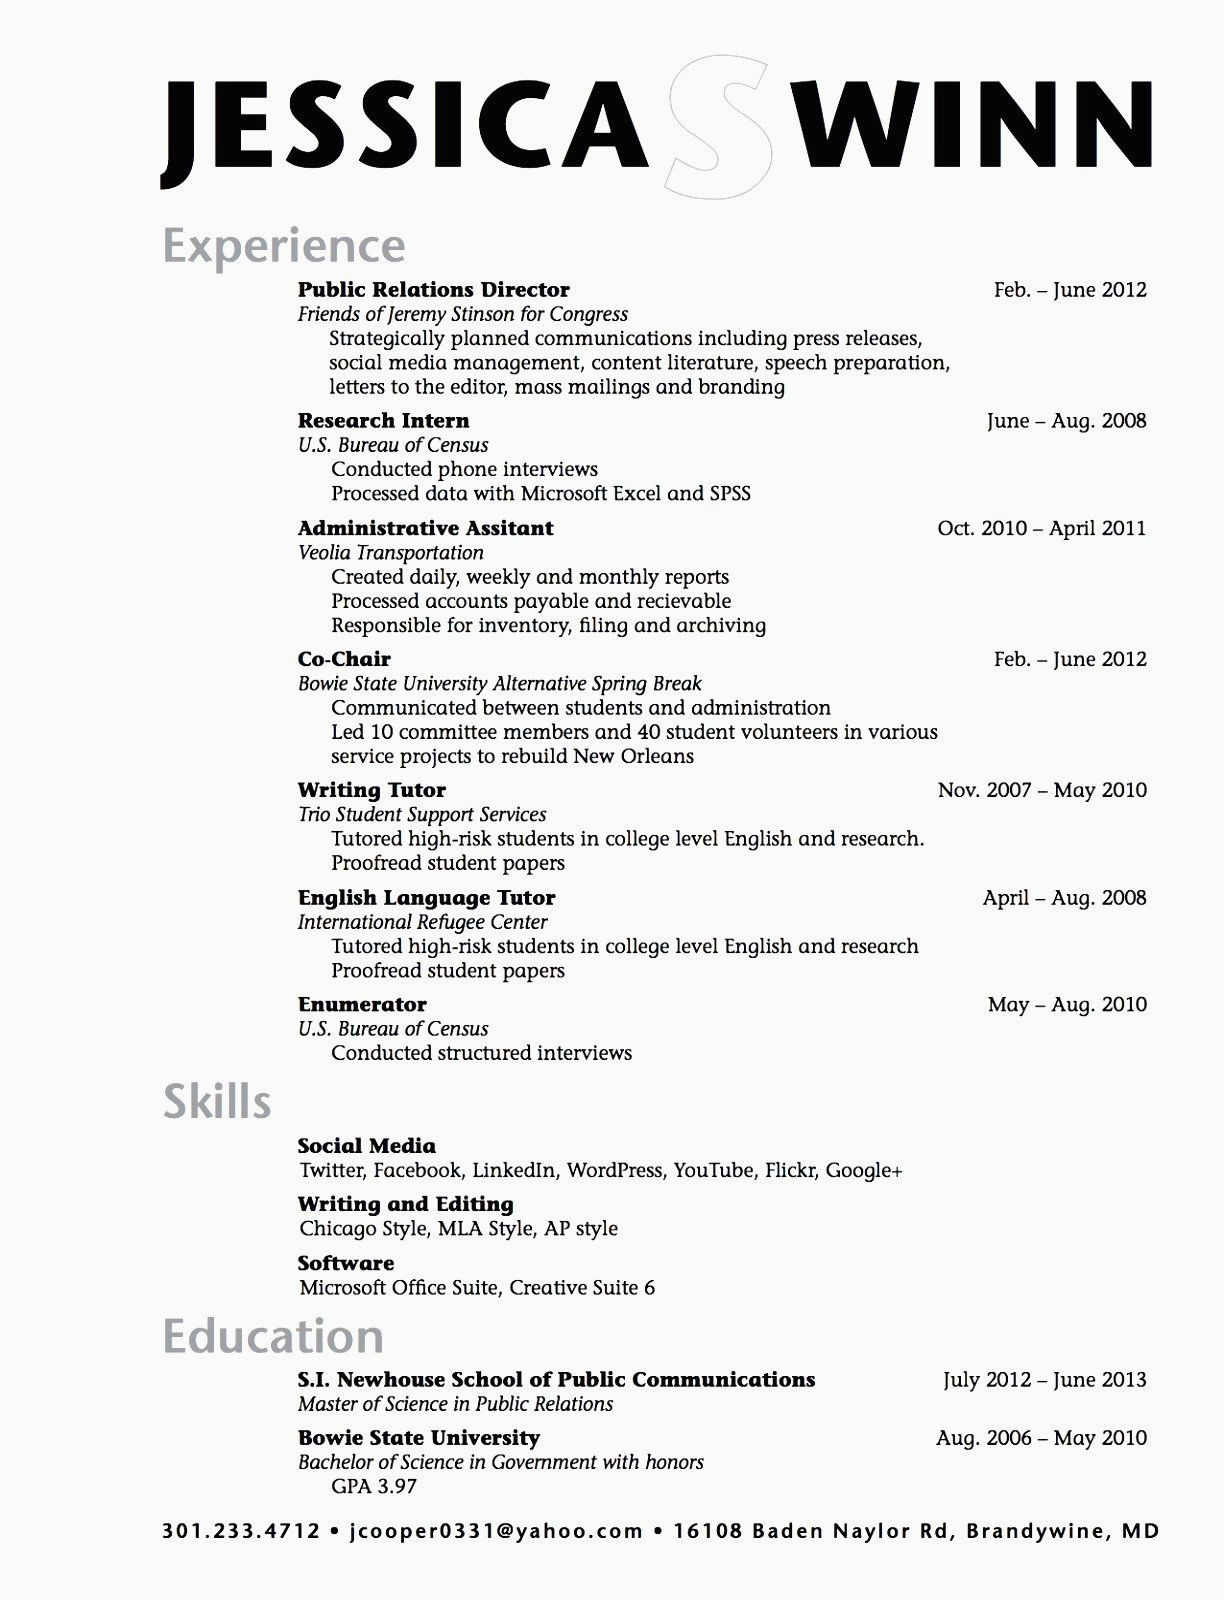 Basic Resume Template for College Students 25 Basic Student Resume Templates In 2020